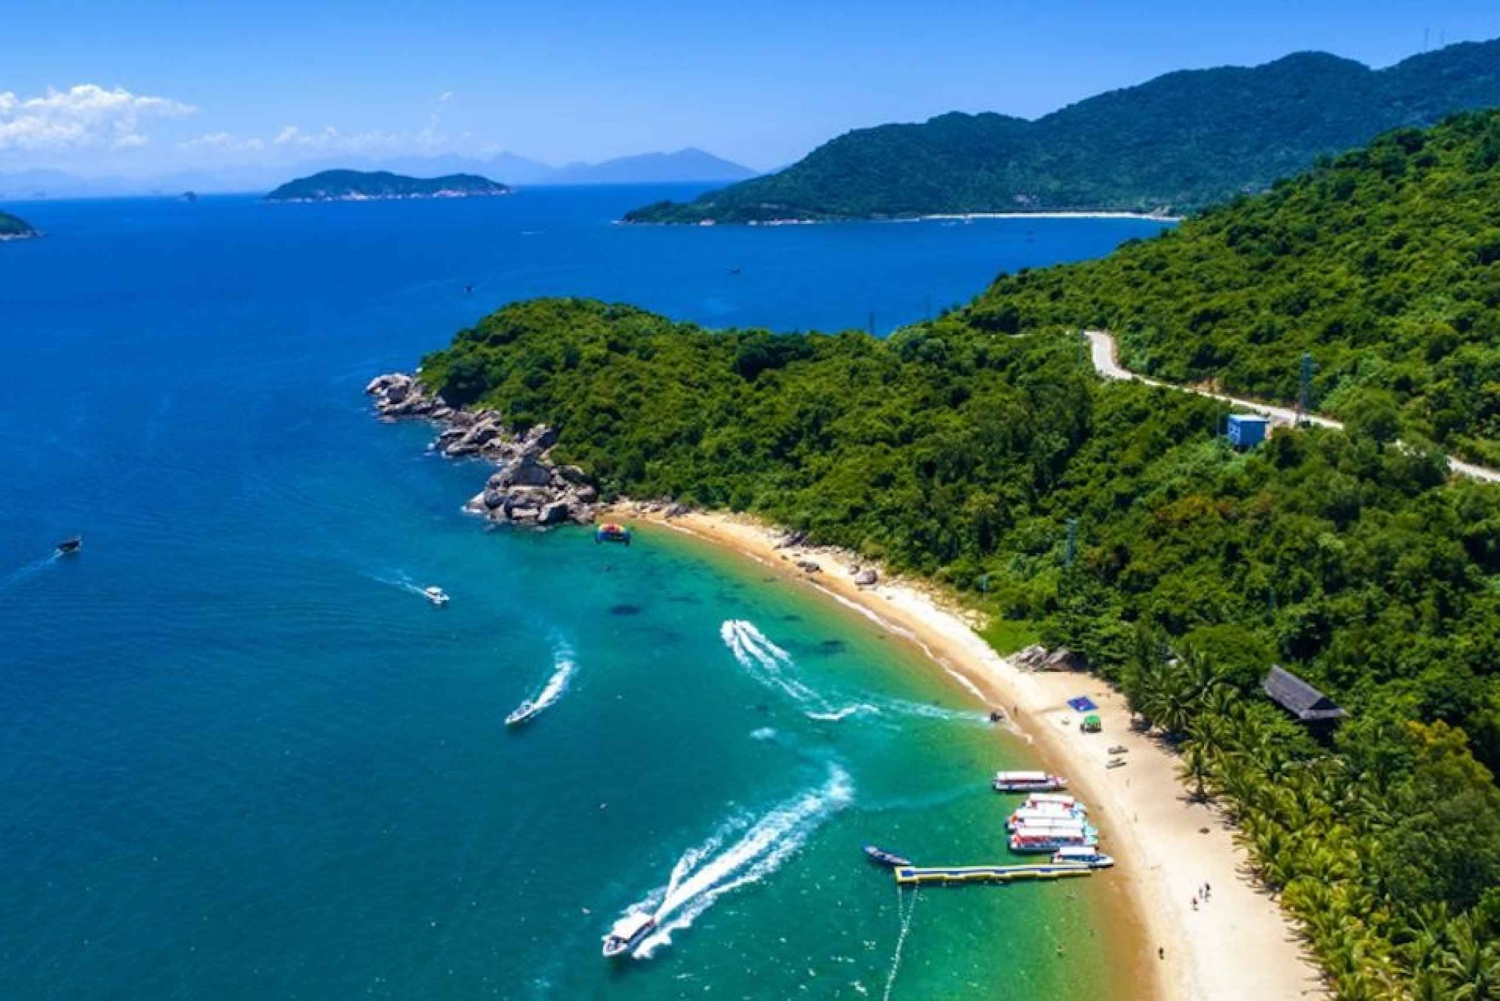 Cham Island Sightseeing & Snorkeling Tour from Hoi An/DaNang